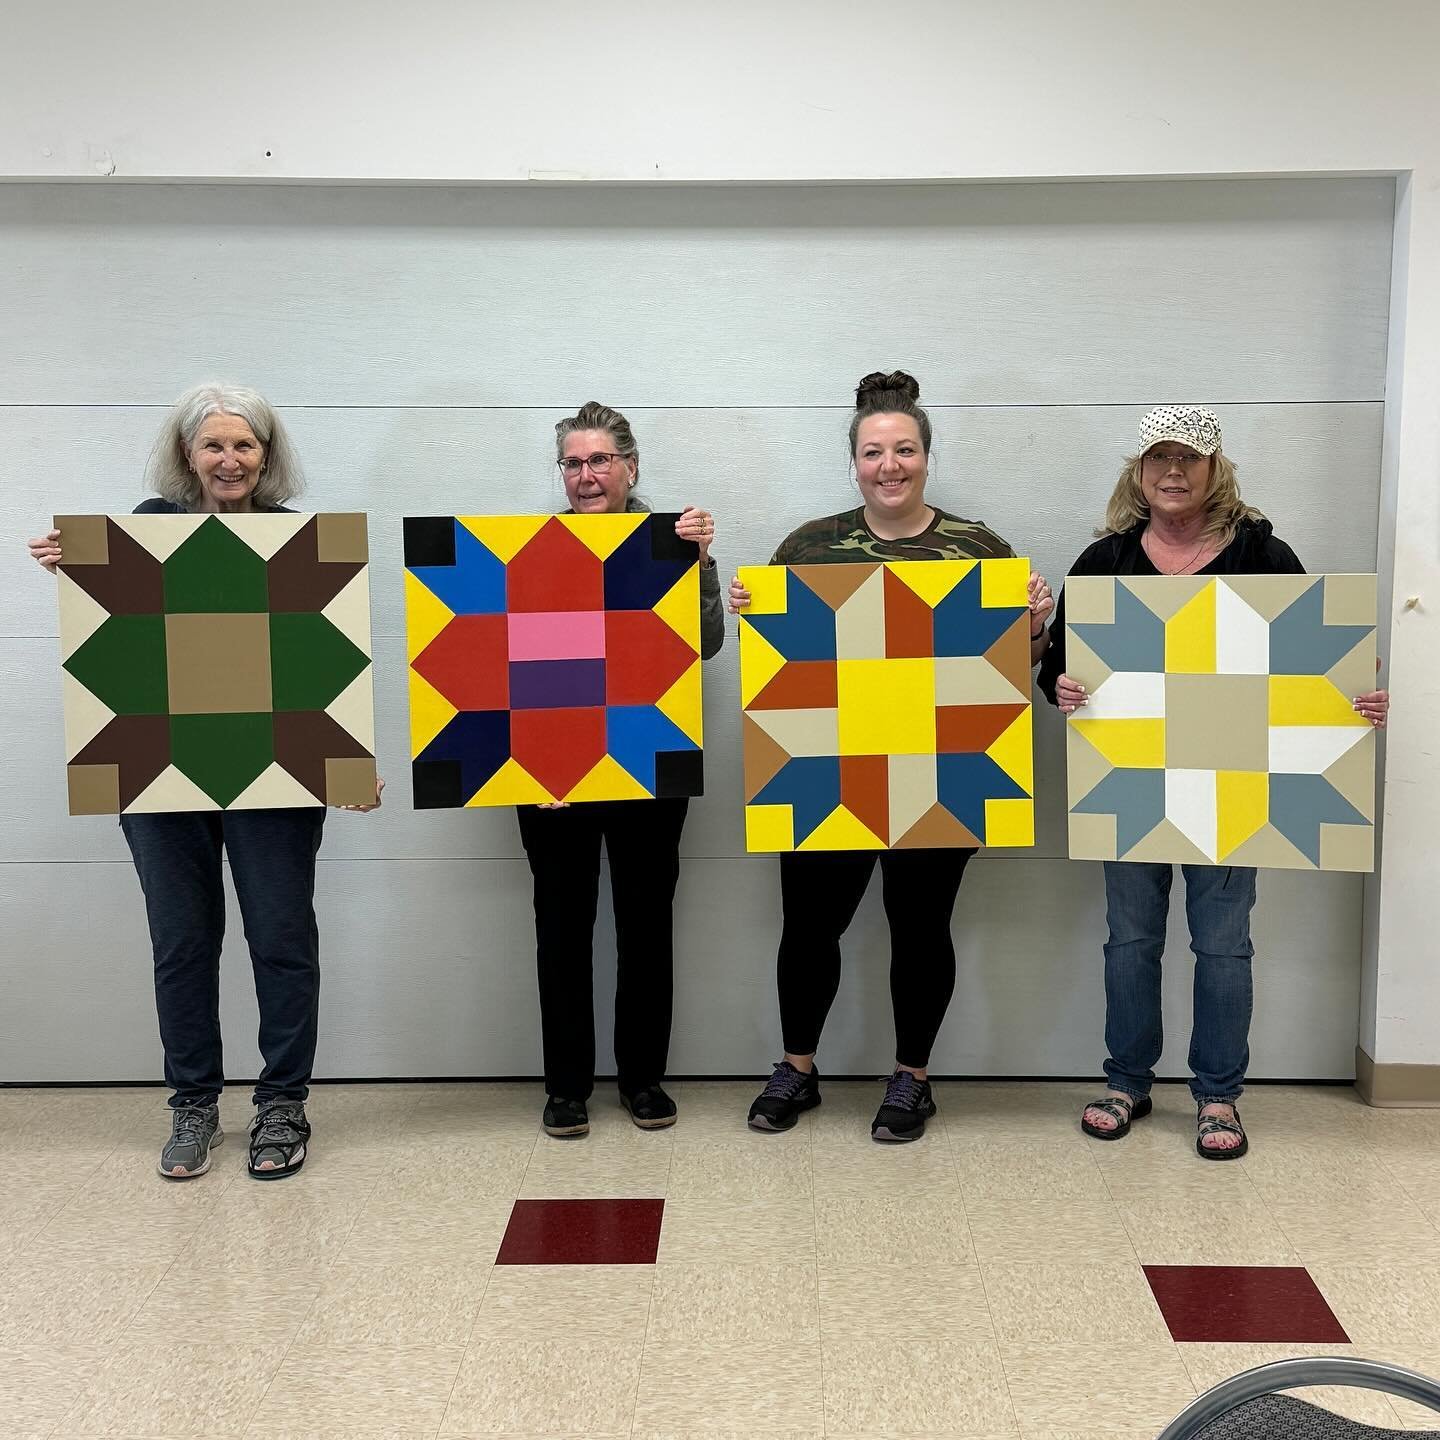 Another successful Barn Quilt class this past Saturday! 

#wrightcountyhistoricalsociety #wrightcountymn #wrightsideofhistory #barnquilt #paintingclass #program #success